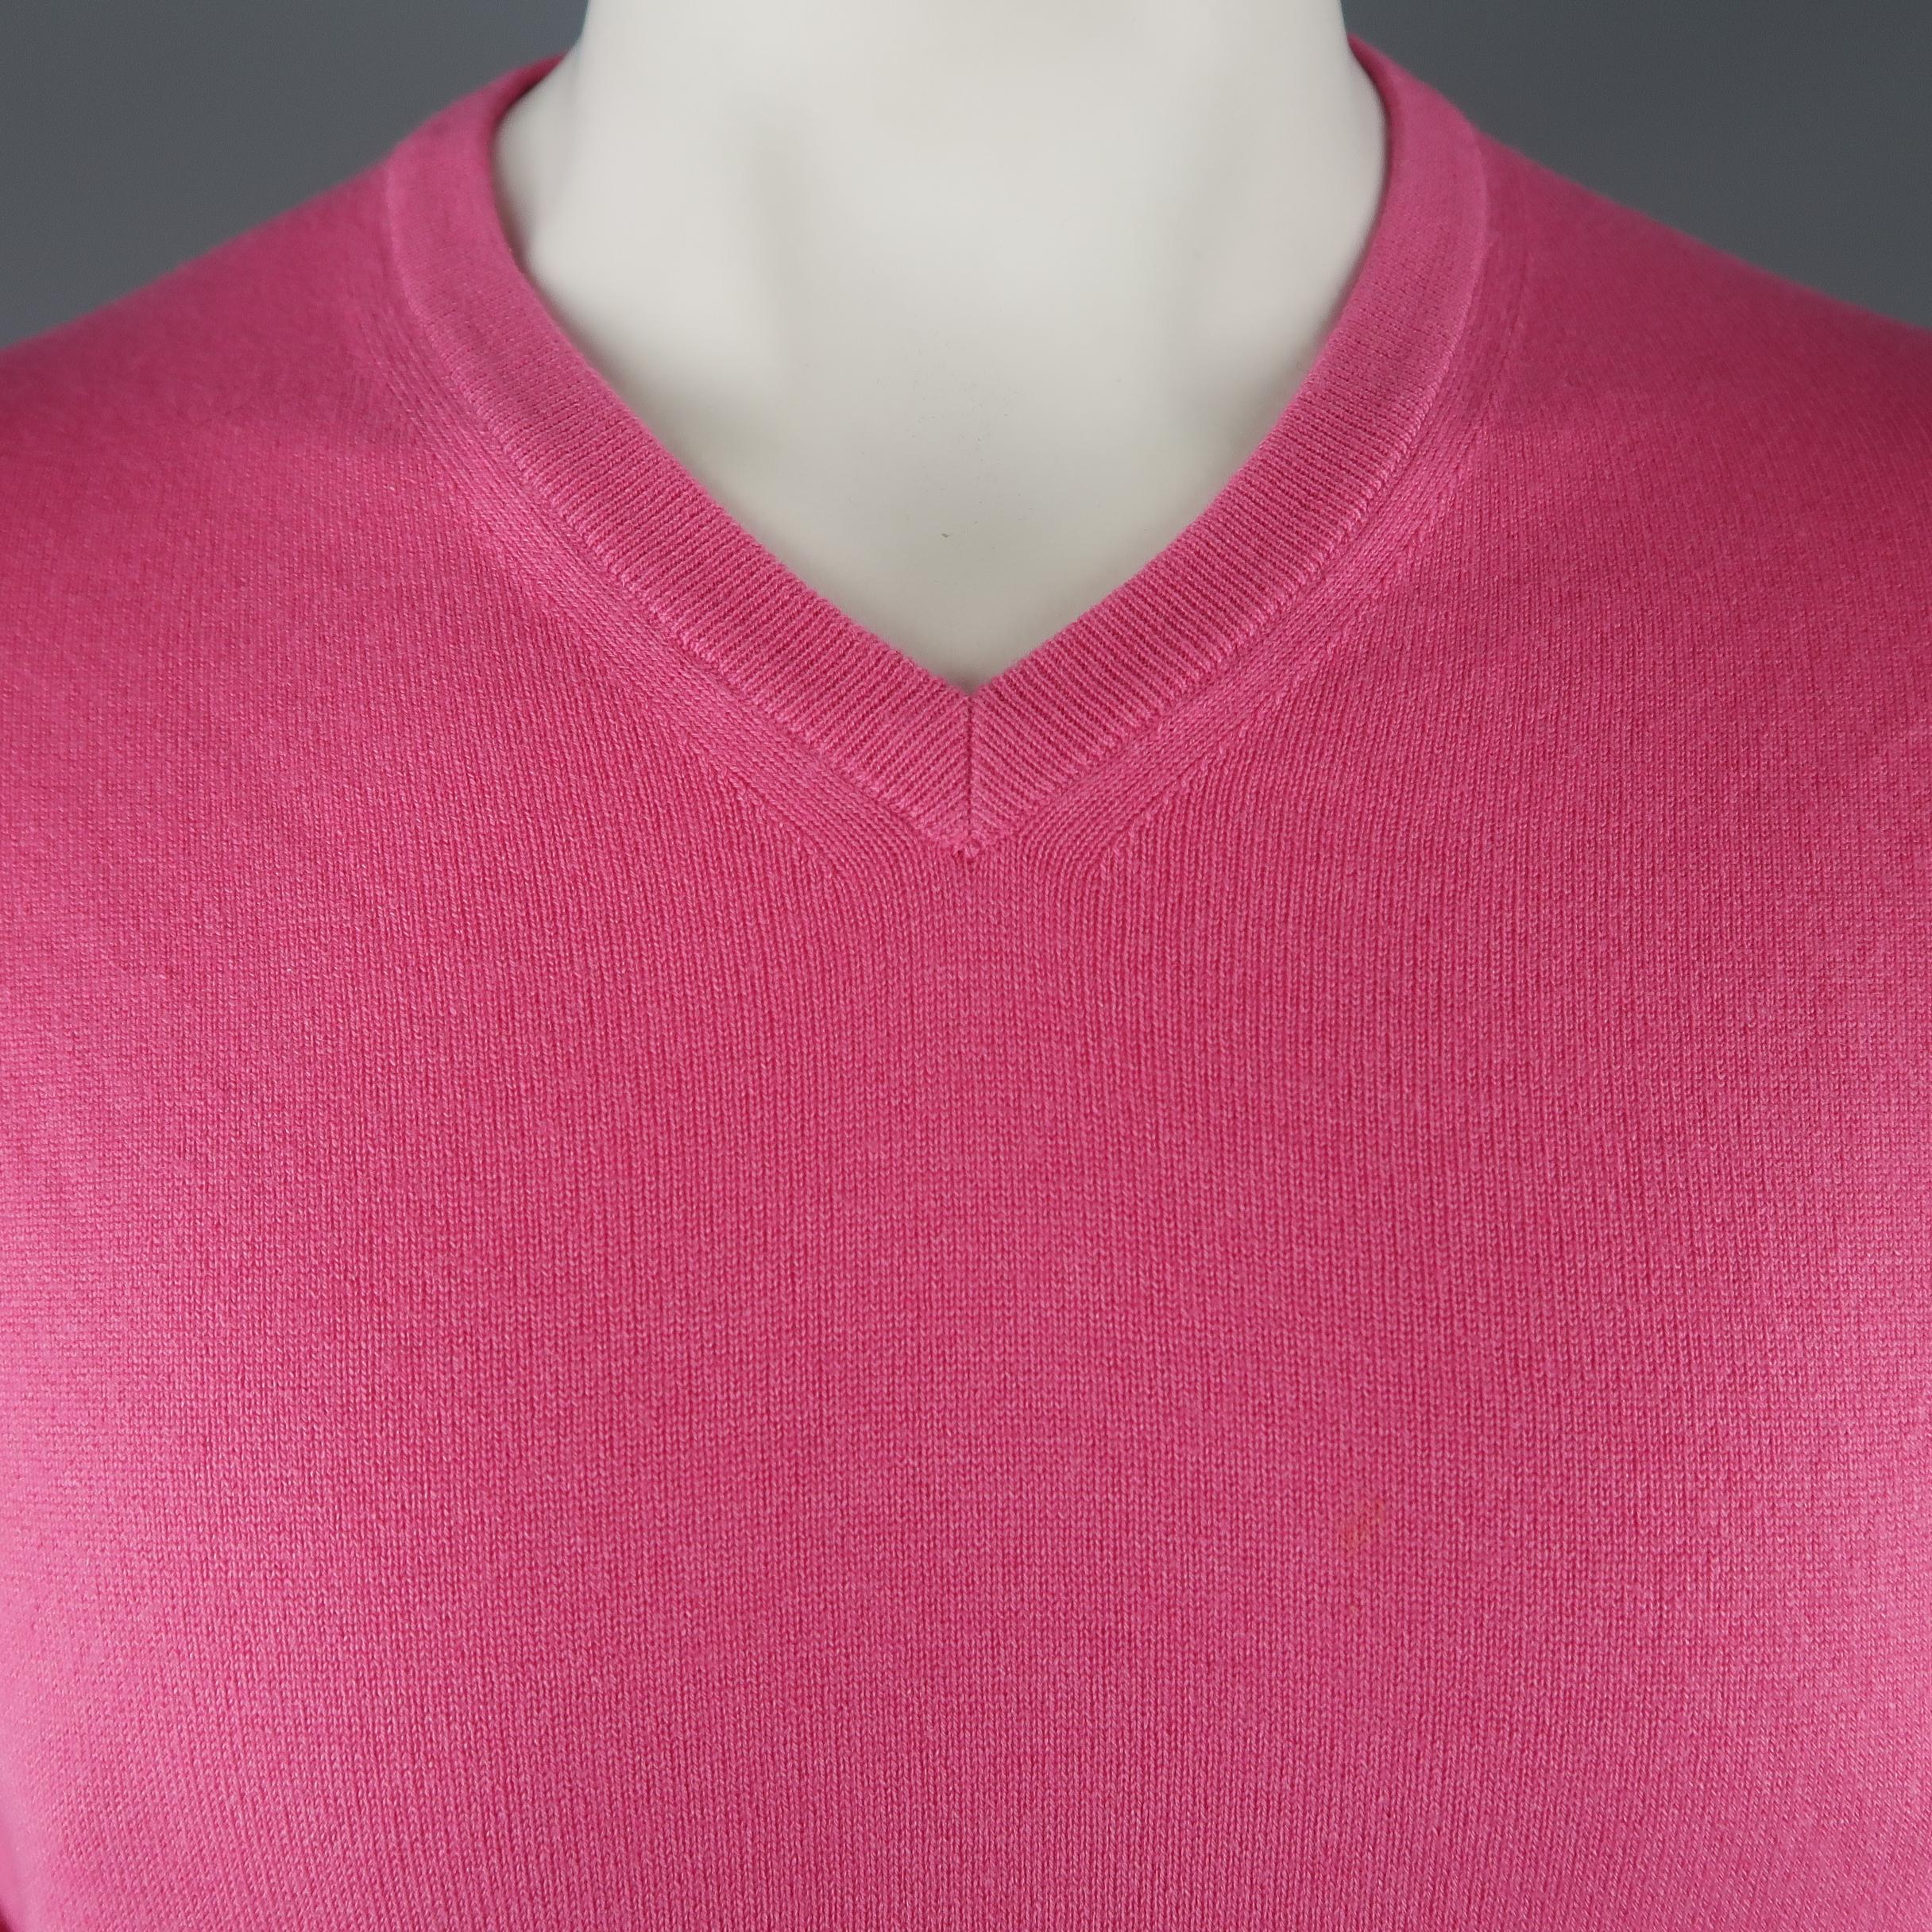 FACONNABLE pullover sweater come in a pink tone in solid silk / cashmere material, with a V-neck, ribbed cuffs and waistband. Presenting a sun damage on the front. Made in Italy.
 
Good Pre-Owned Condition.
Marked: M
 
Measurements:
 
Shoulder: 16.5